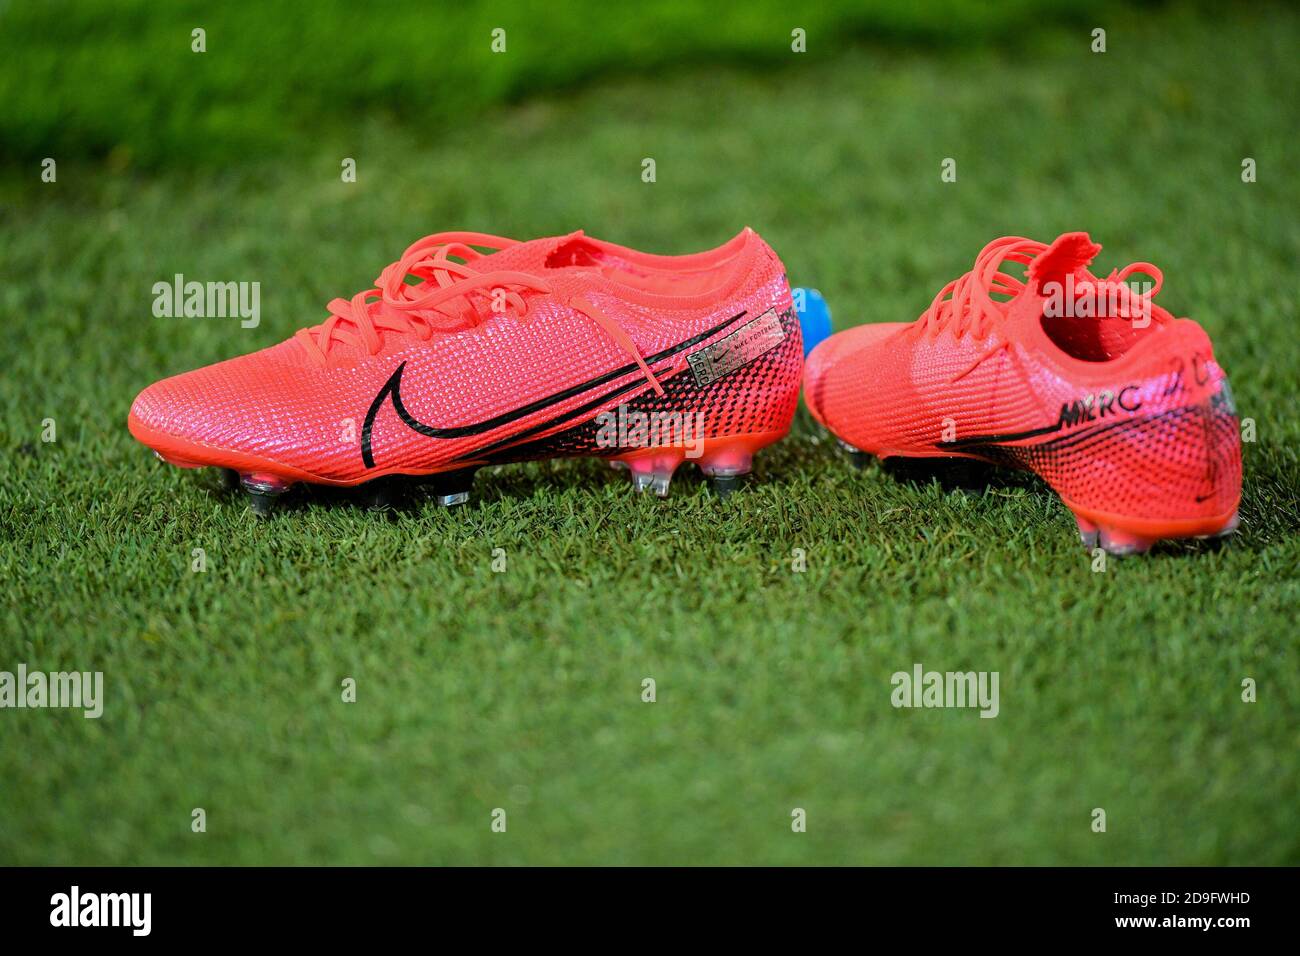 ROTTERDAM, NETHERLANDS - NOVEMBER 05: Nike merc 20 shoes during a training  session before the UEFA Europa League match between Feyenoord and CSKA  Moscow on October 22, 2020 in Rotterdam, The Netherlands (